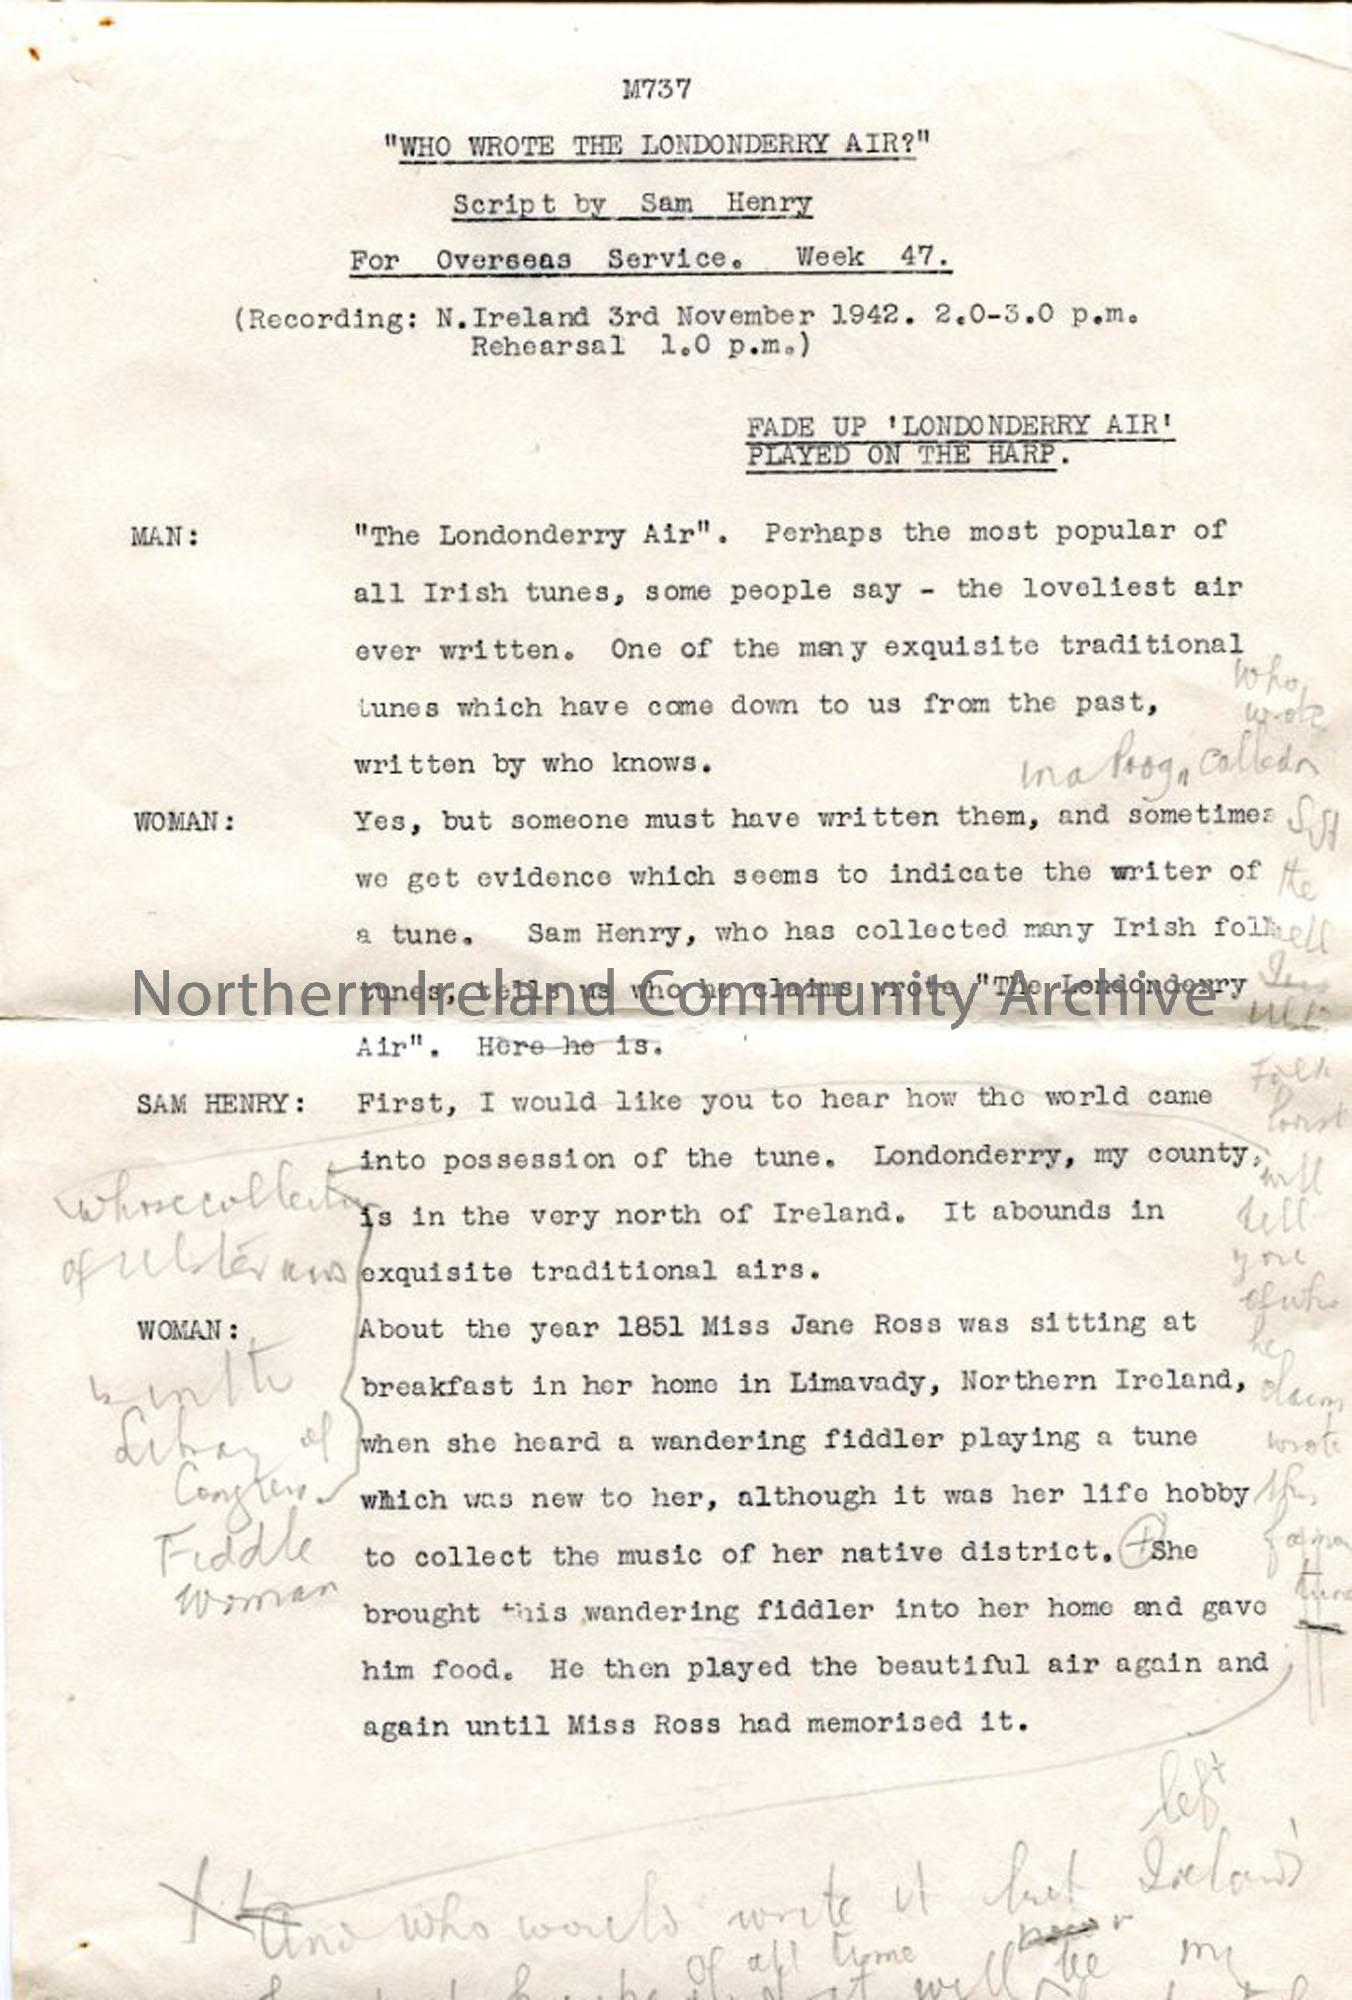 Page One of four pages – script for broadcast ‘Who wrote the Londonderry Air?’